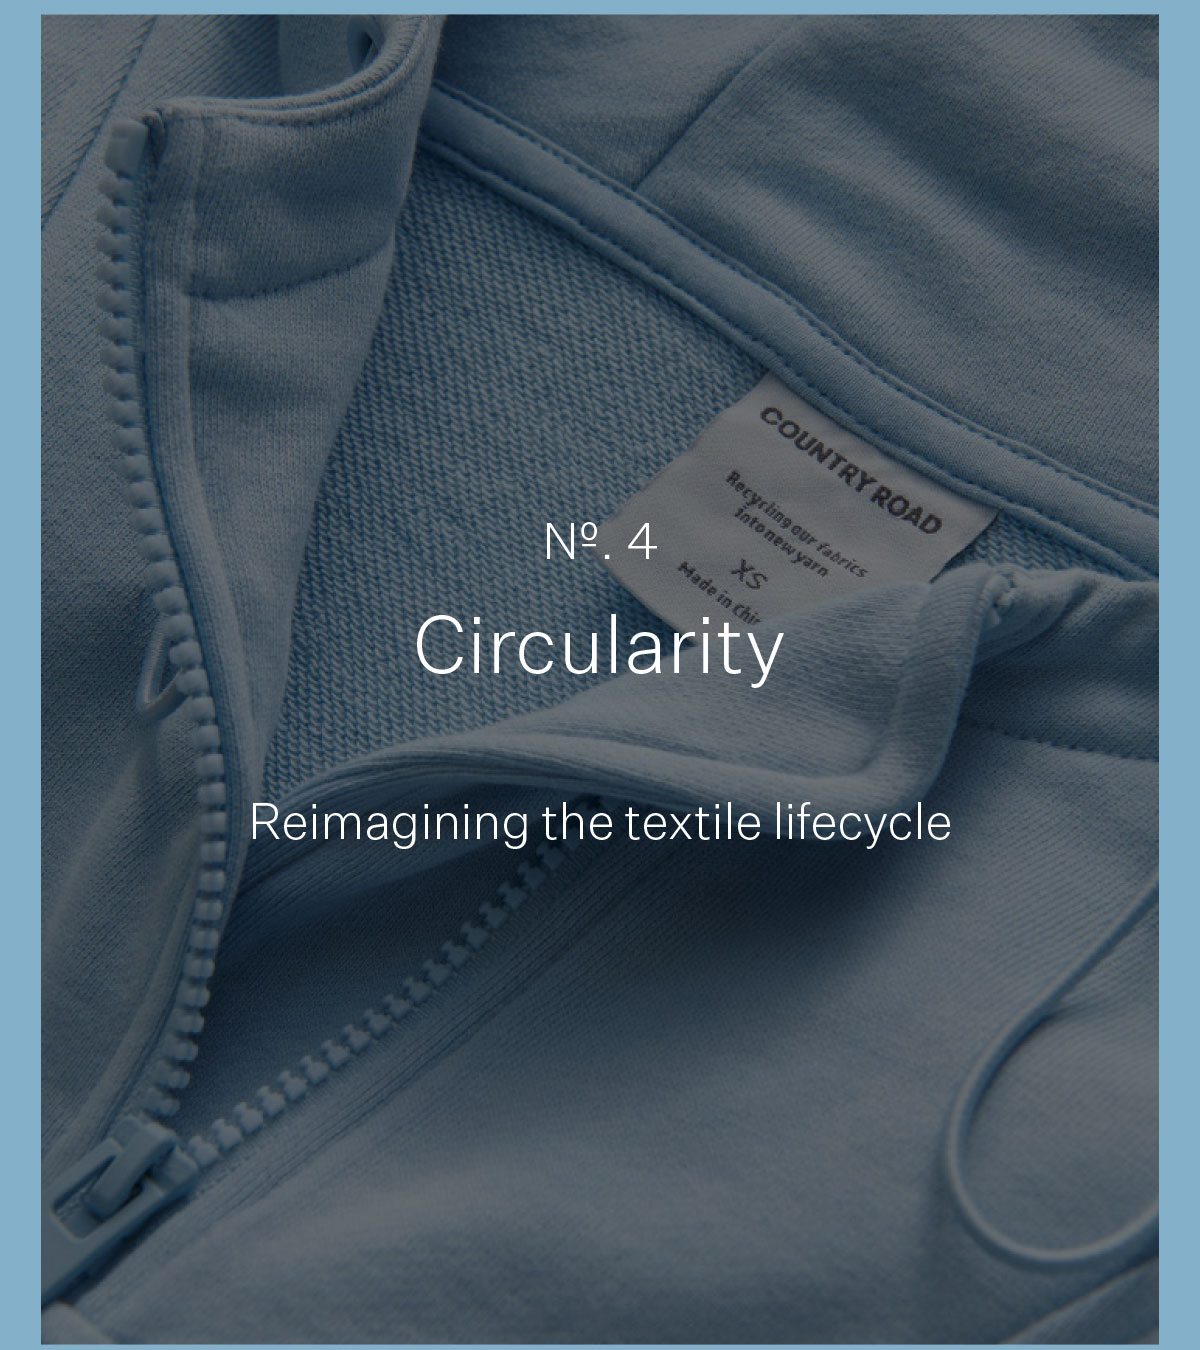 Circularity | Reimagining the textile lifecycle